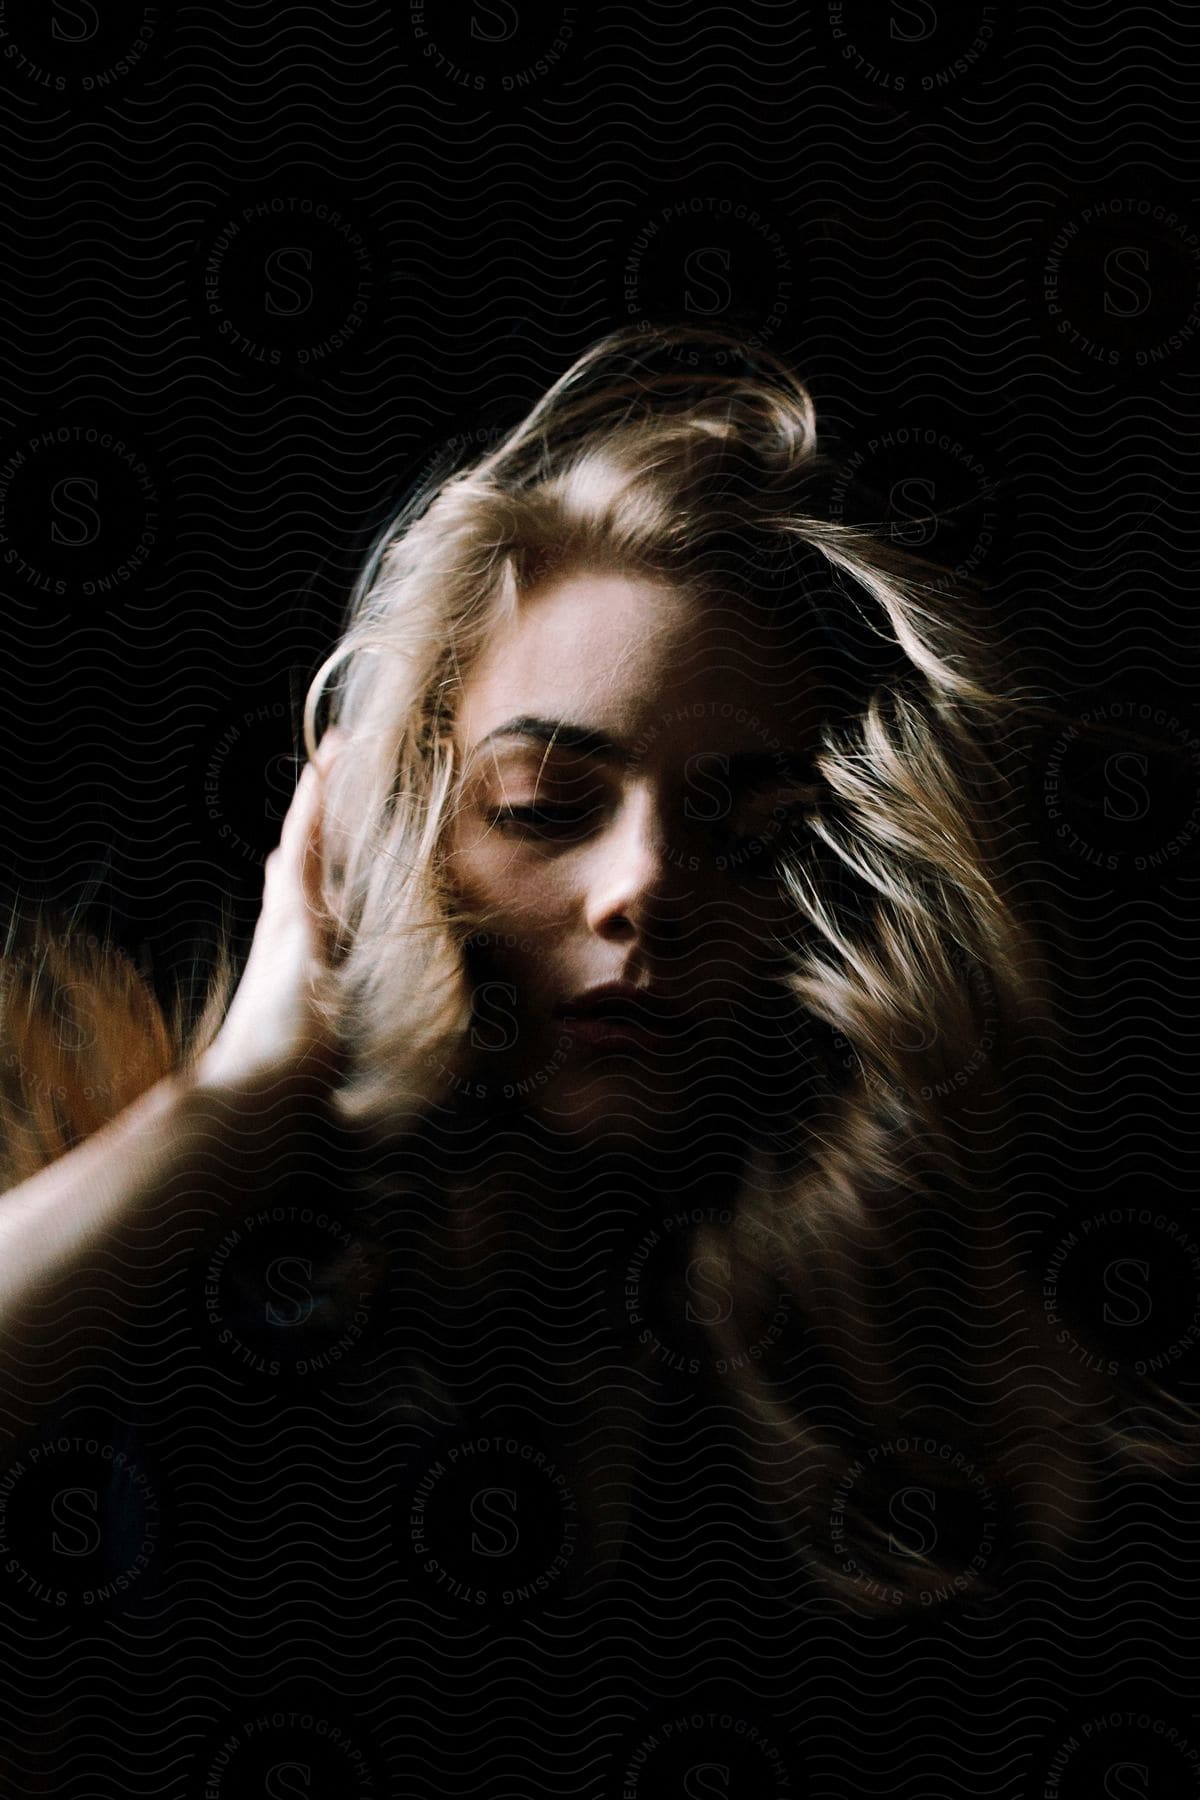 A woman posing for the camera ruffling her hair